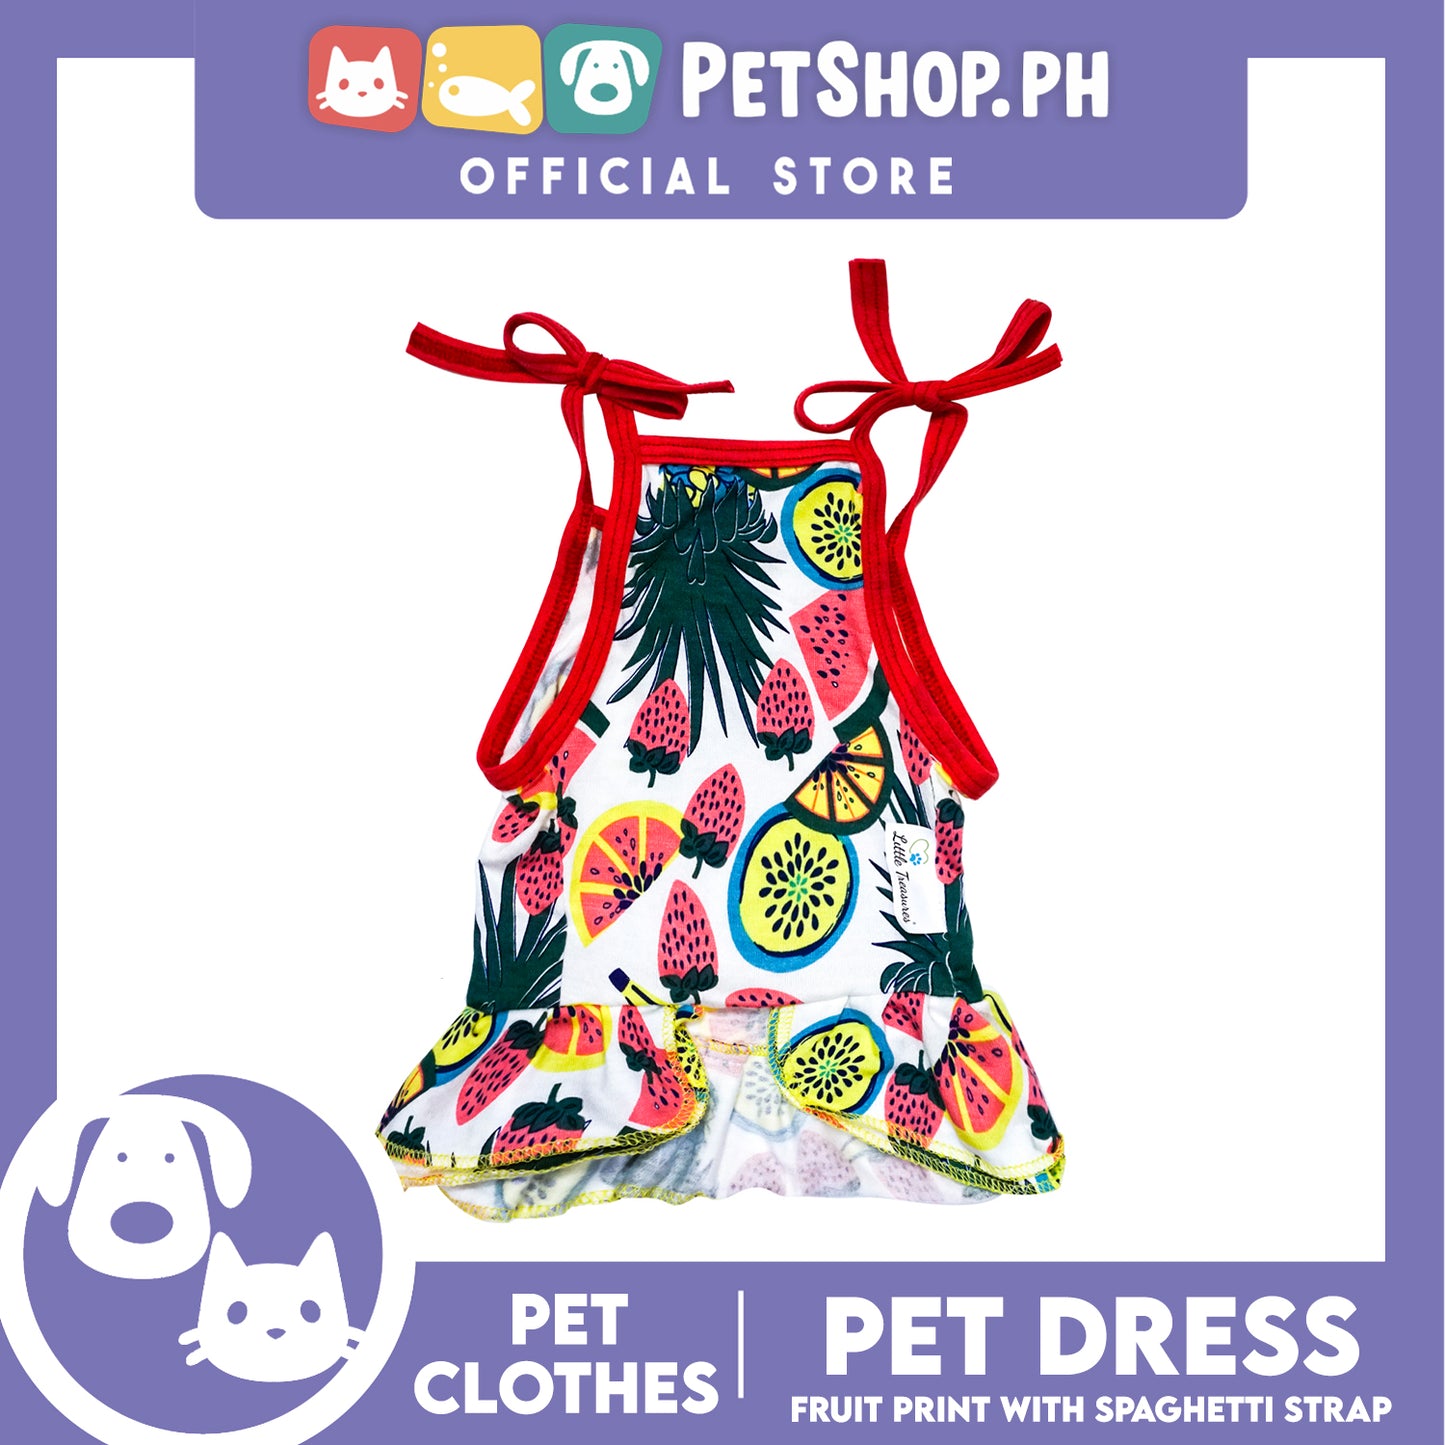 Pet Dress Fruit Print with Spaghetti Strap (Large) Pet Dress Clothes Perfect for Dogs